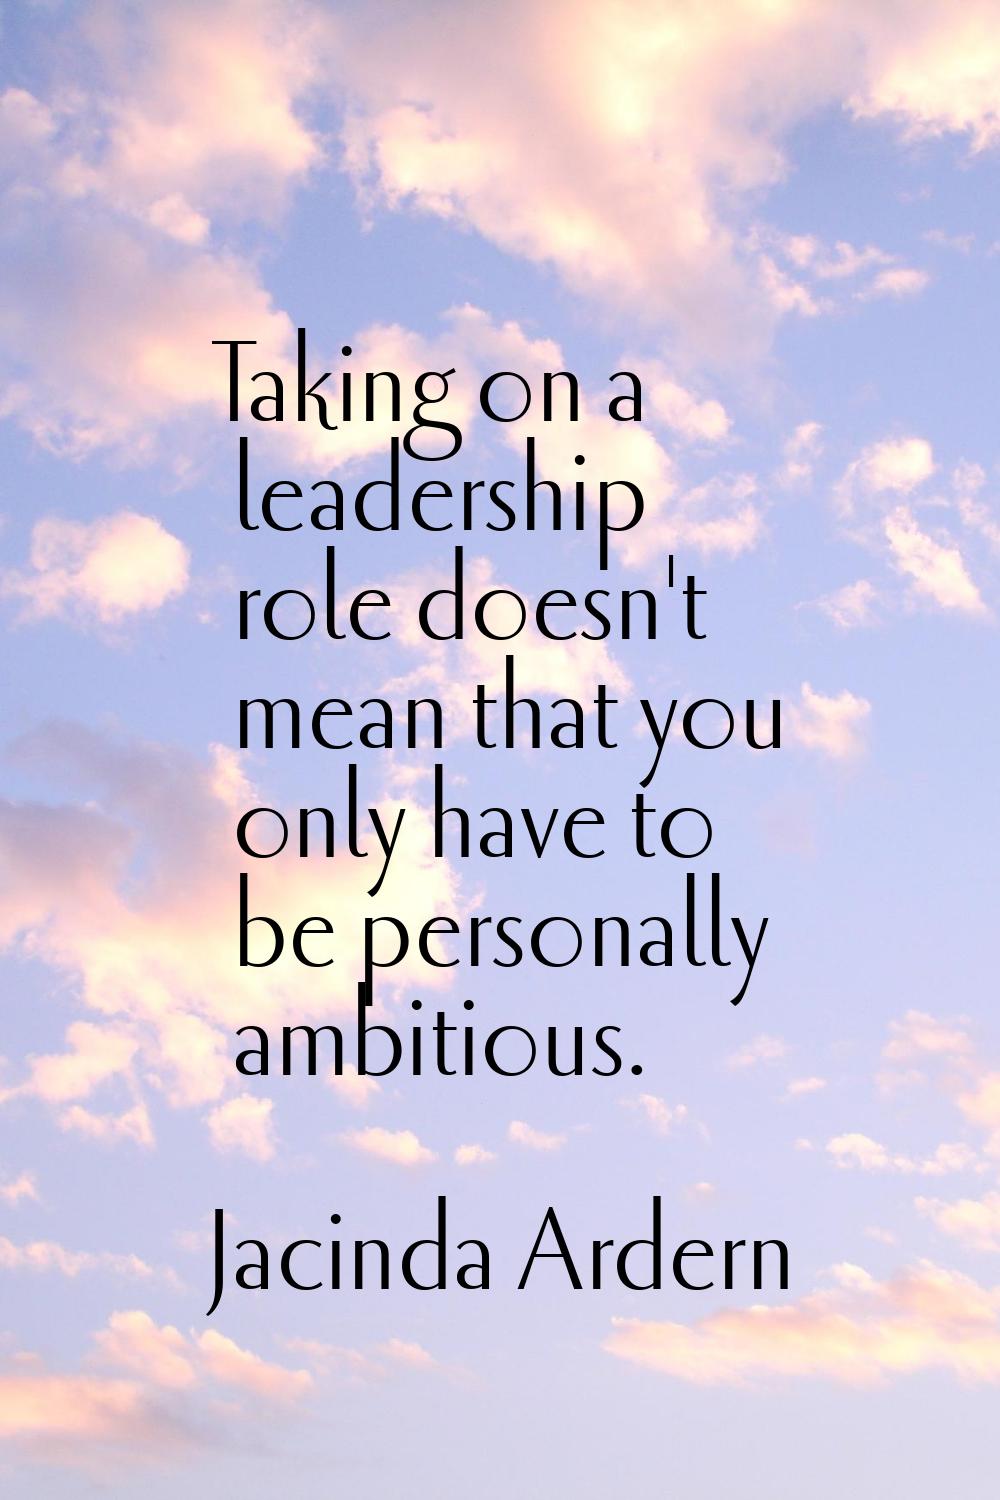 Taking on a leadership role doesn't mean that you only have to be personally ambitious.